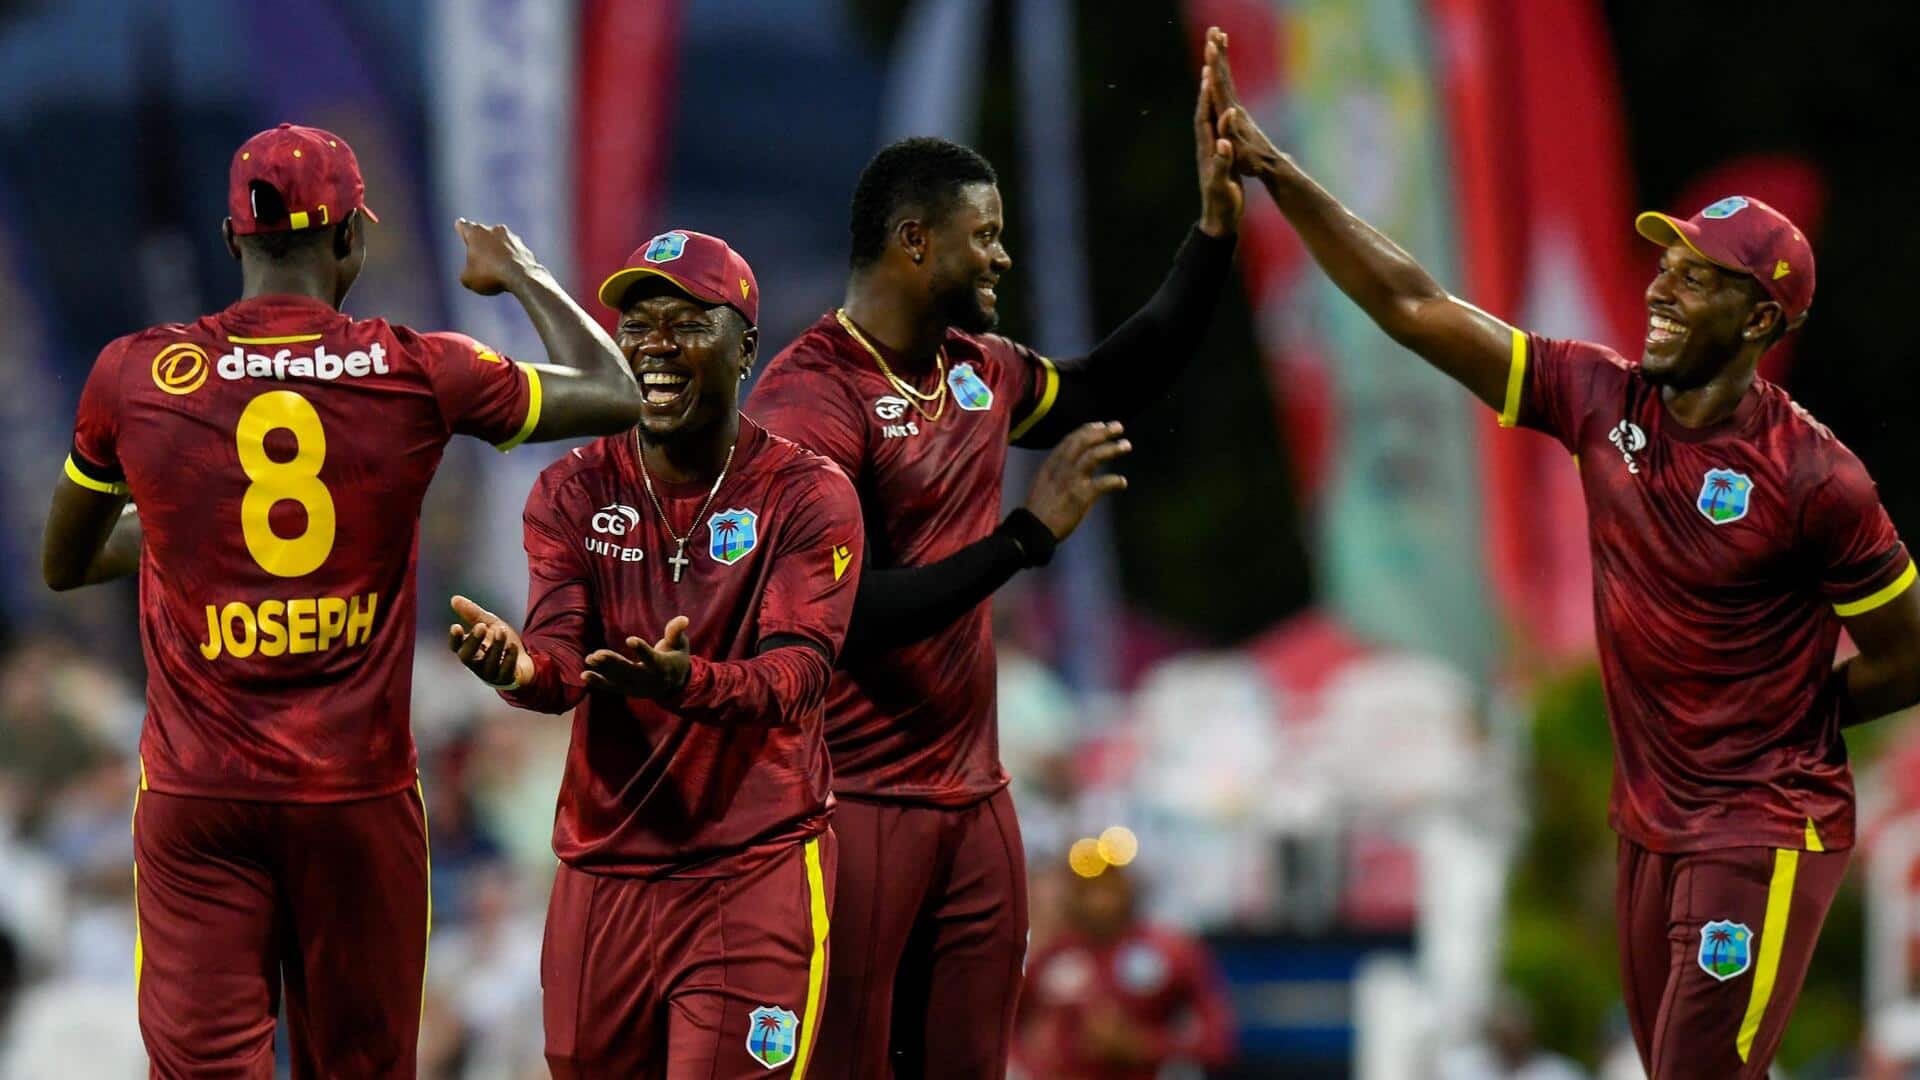 3rd ODI: West Indies beat England, claim historic series win